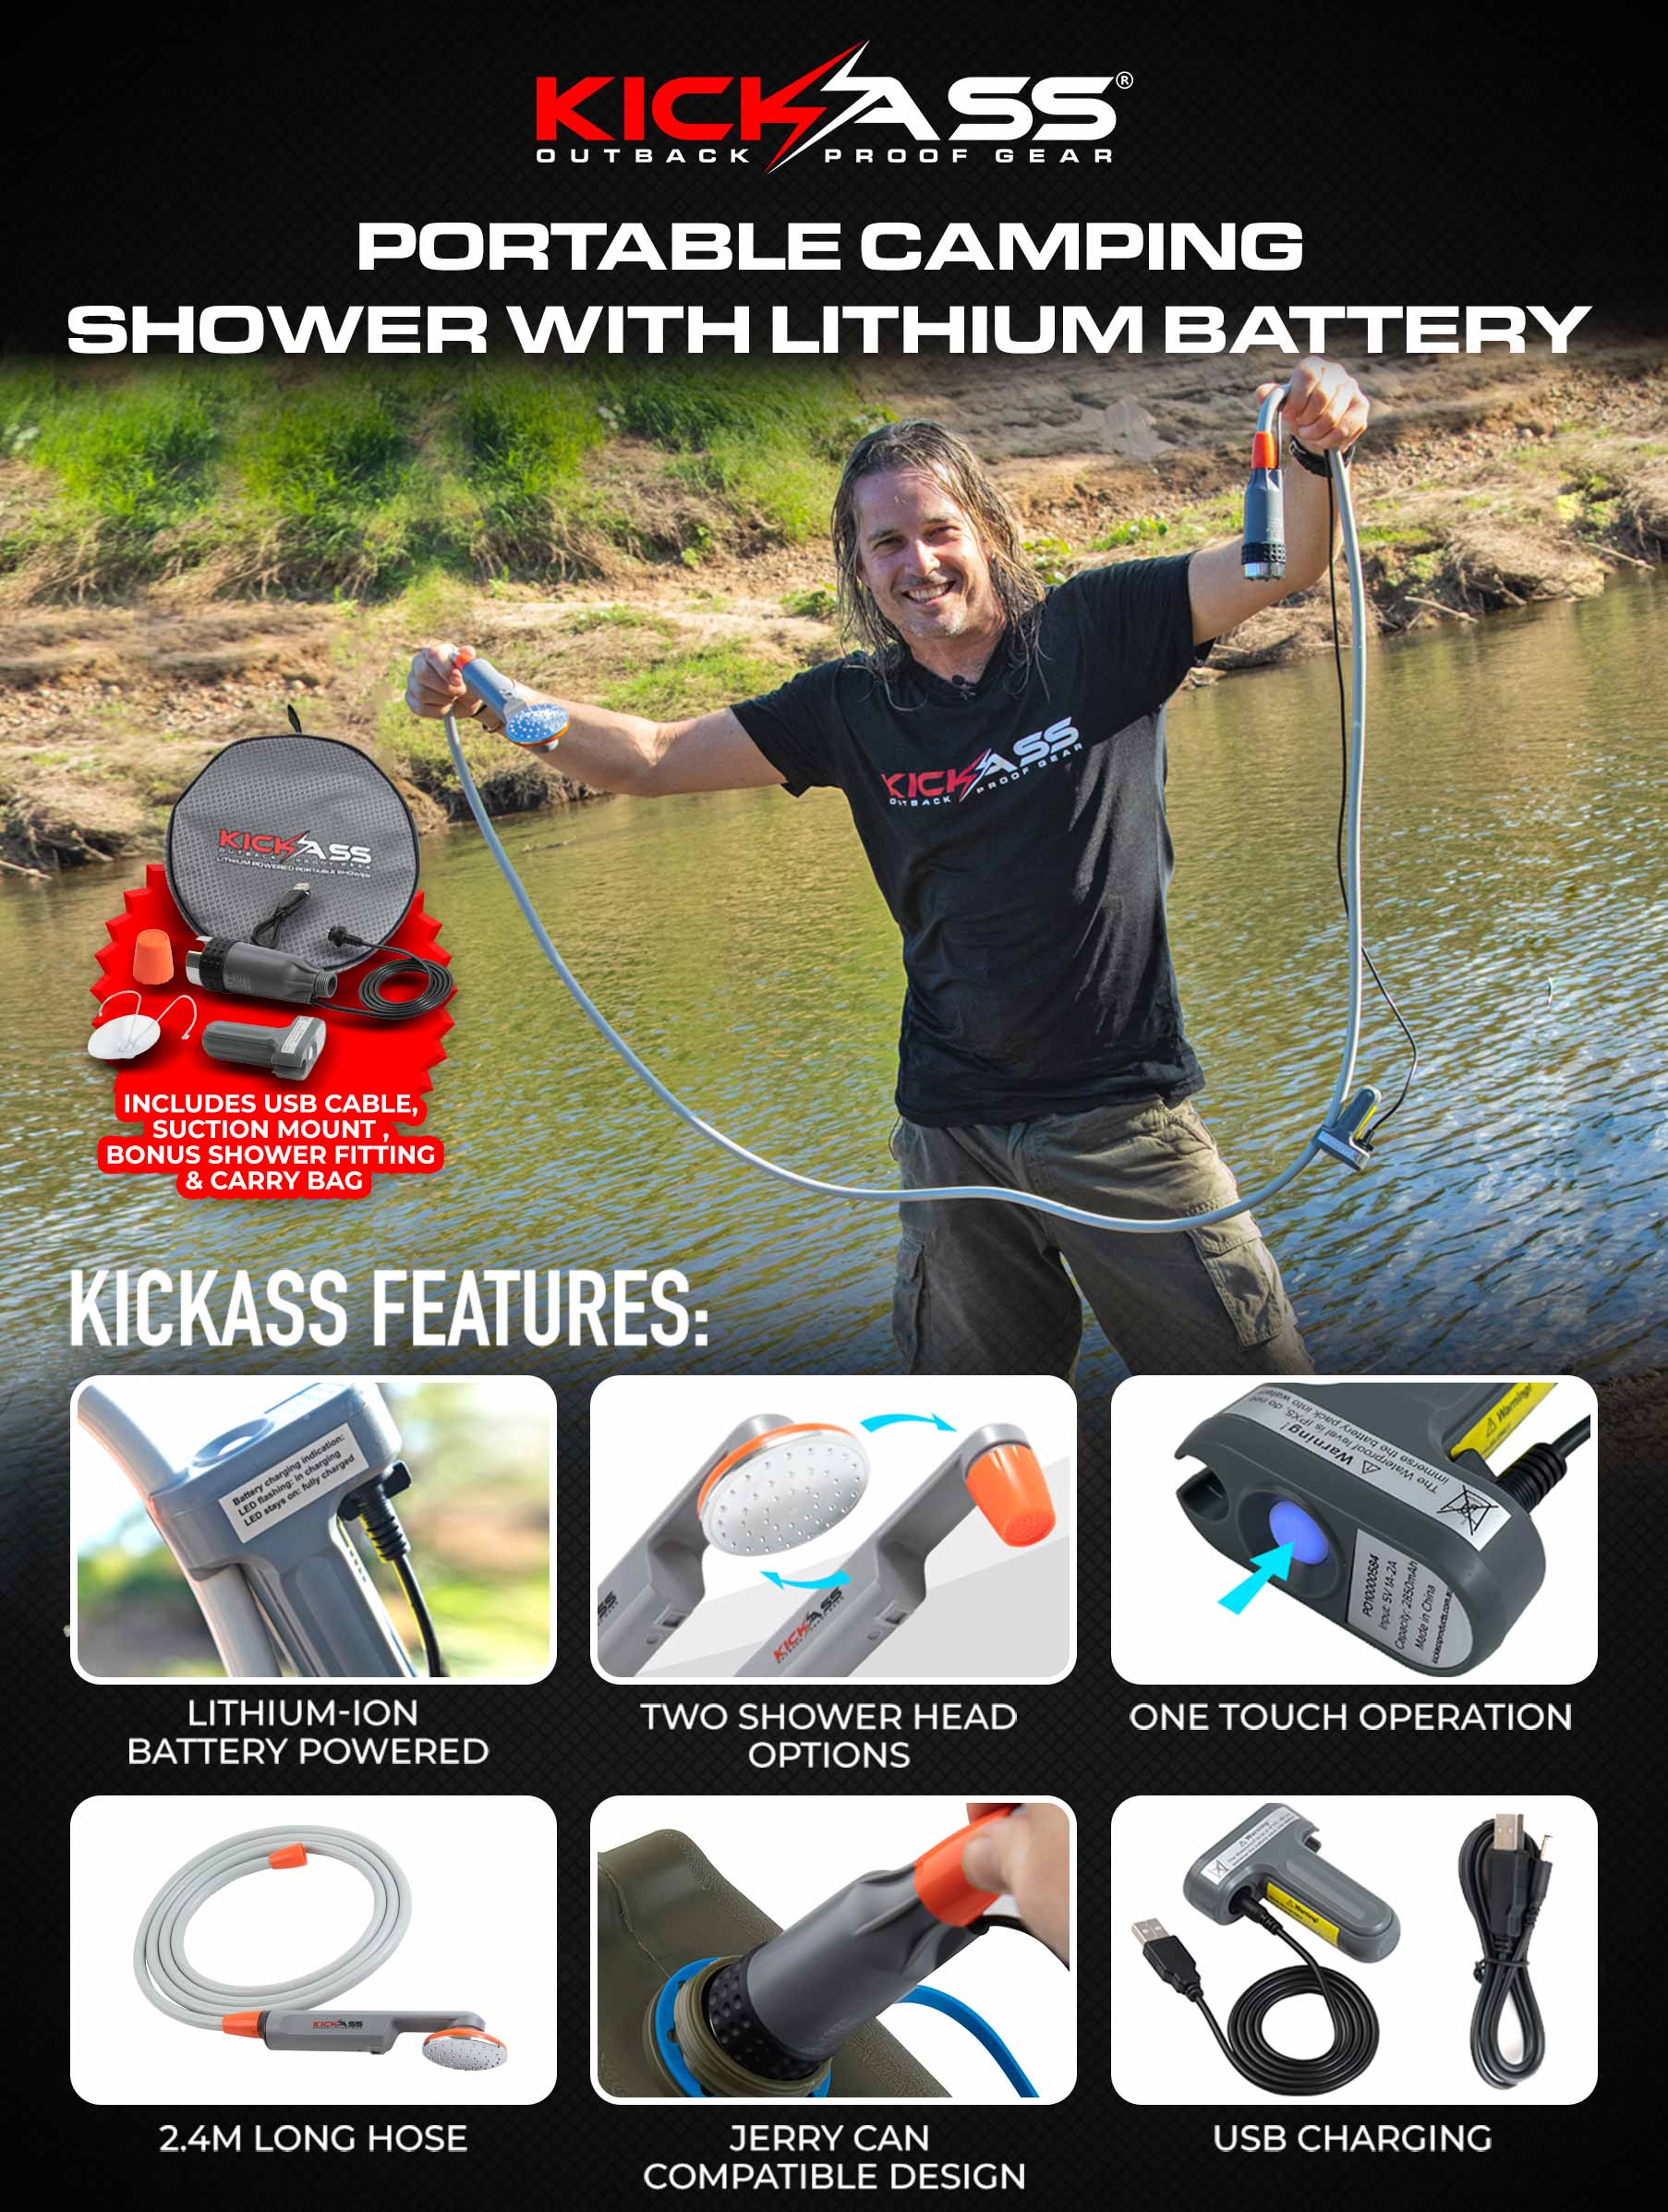 KICKASS Portable Camping Shower with Lithium Battery 